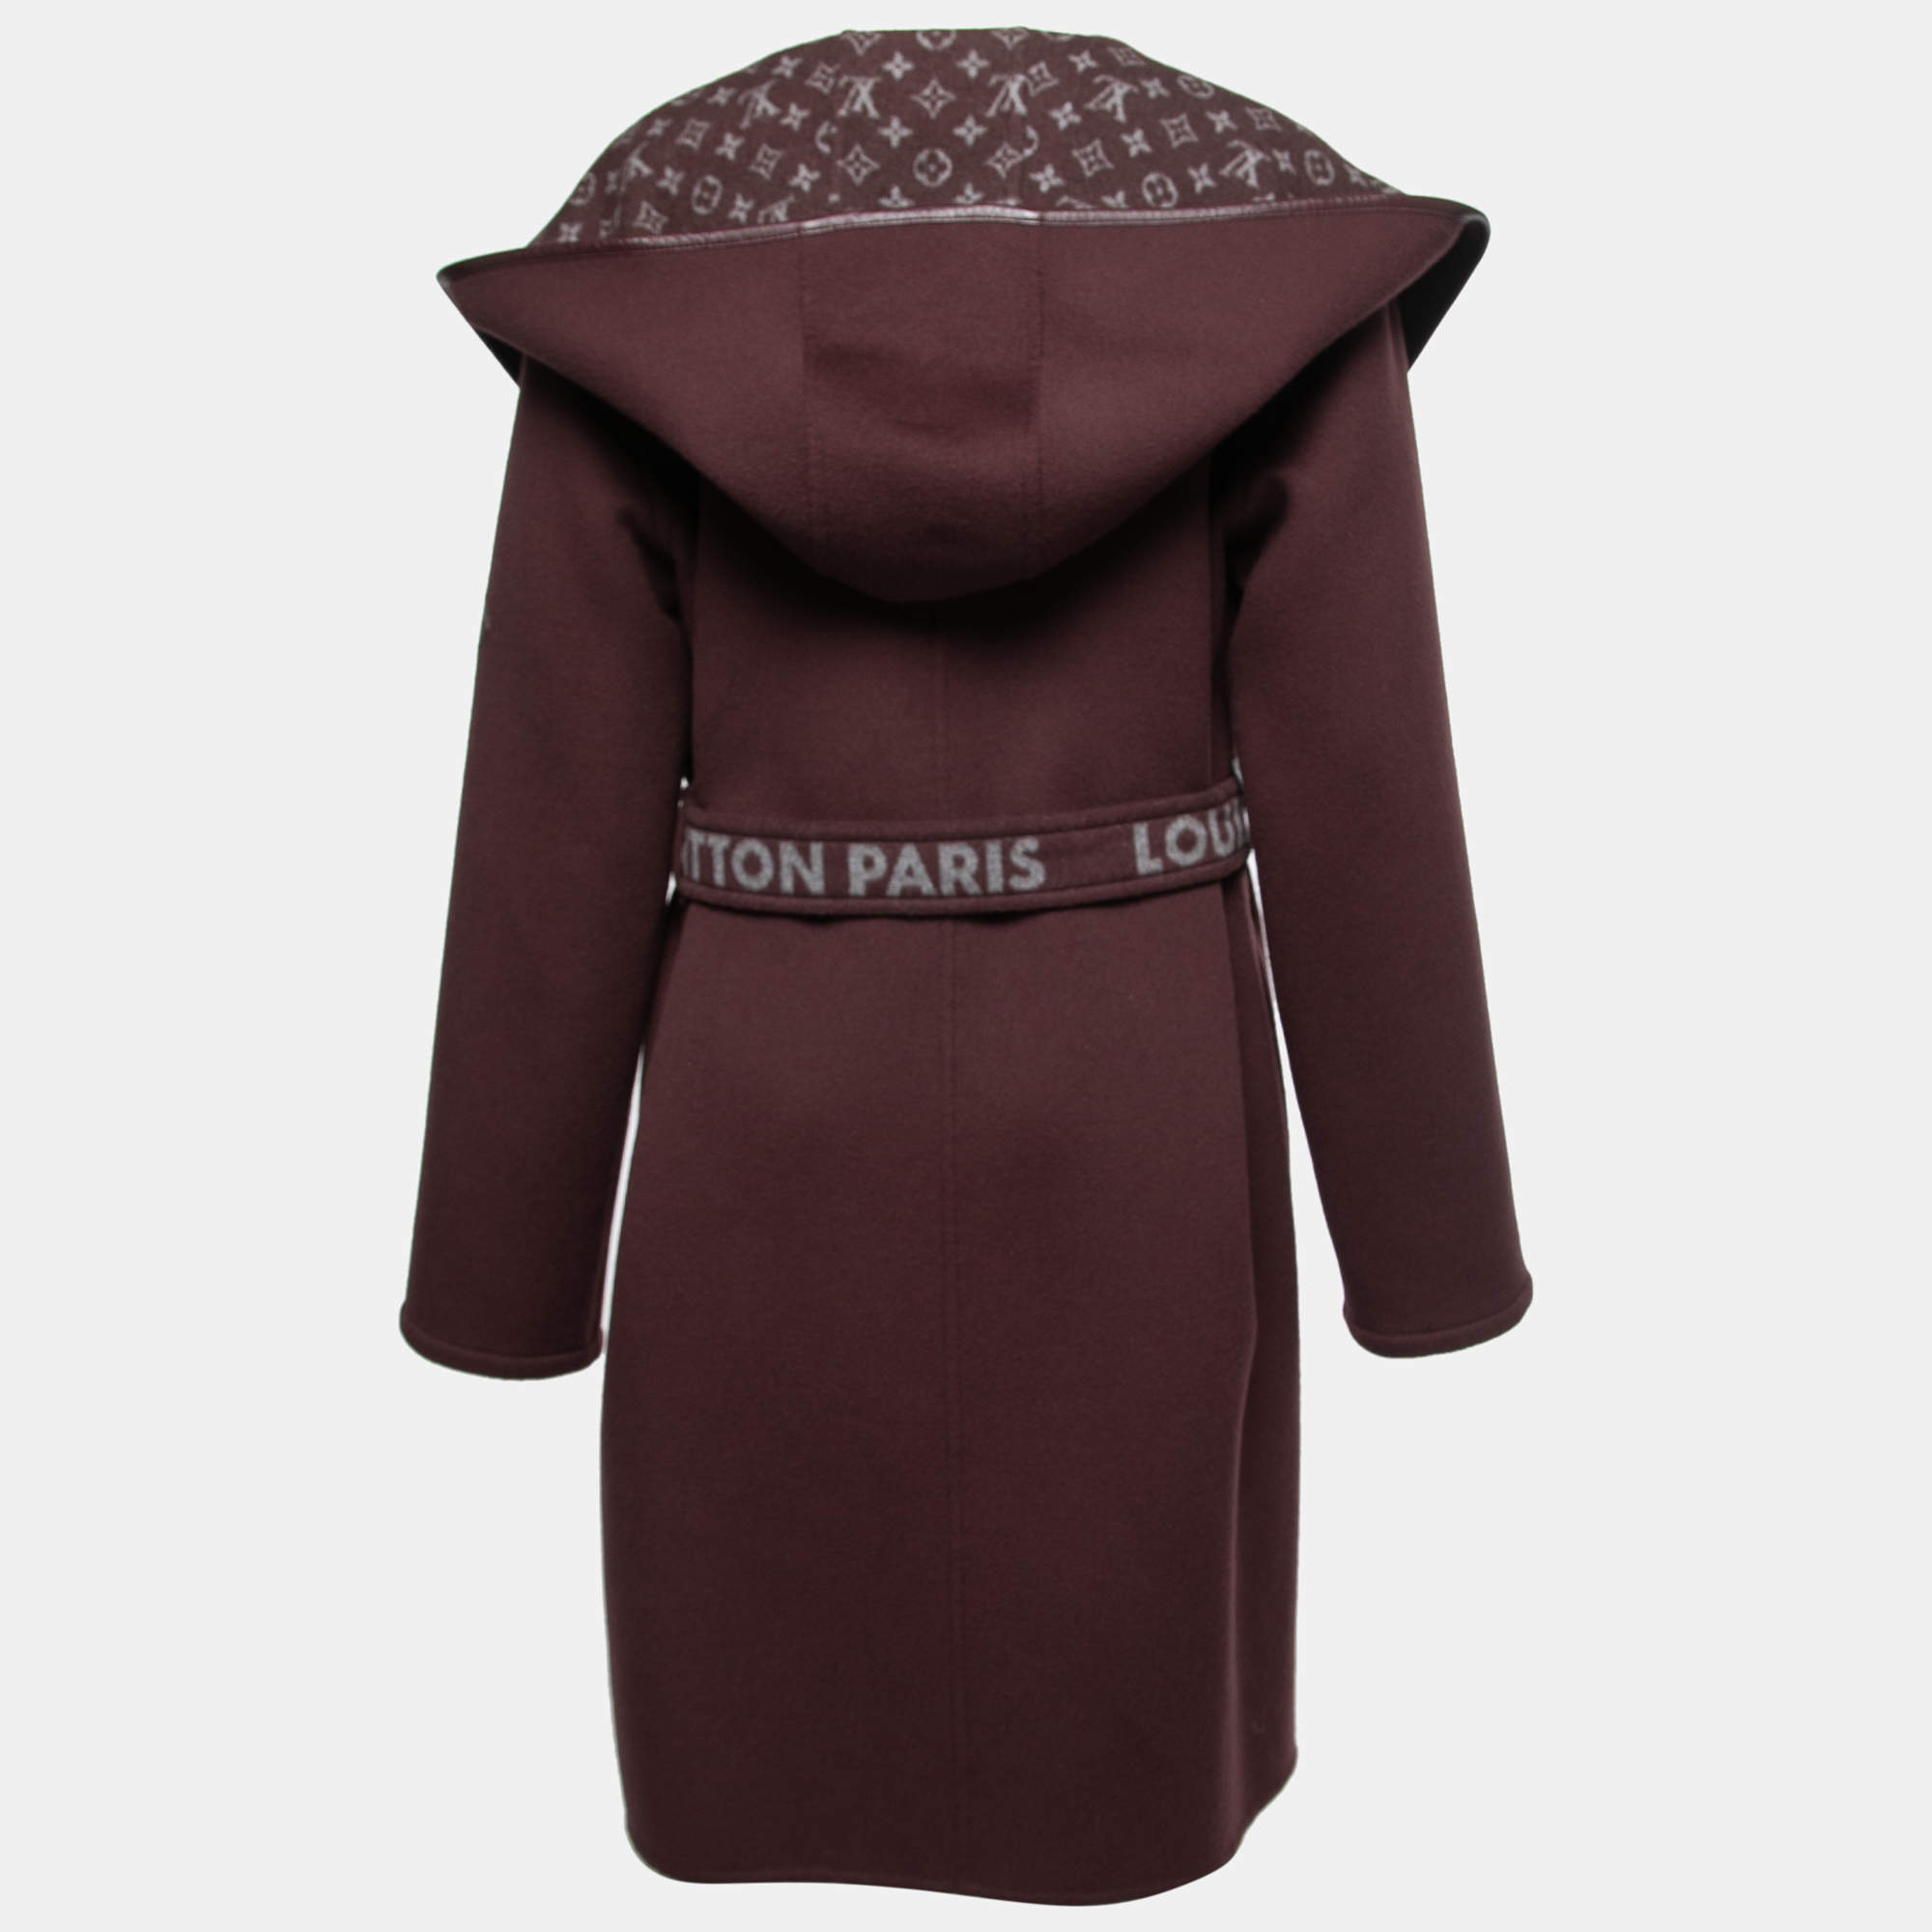 Jackets - Clothings  Hooded wrap coat, Louis vuitton, Casual style